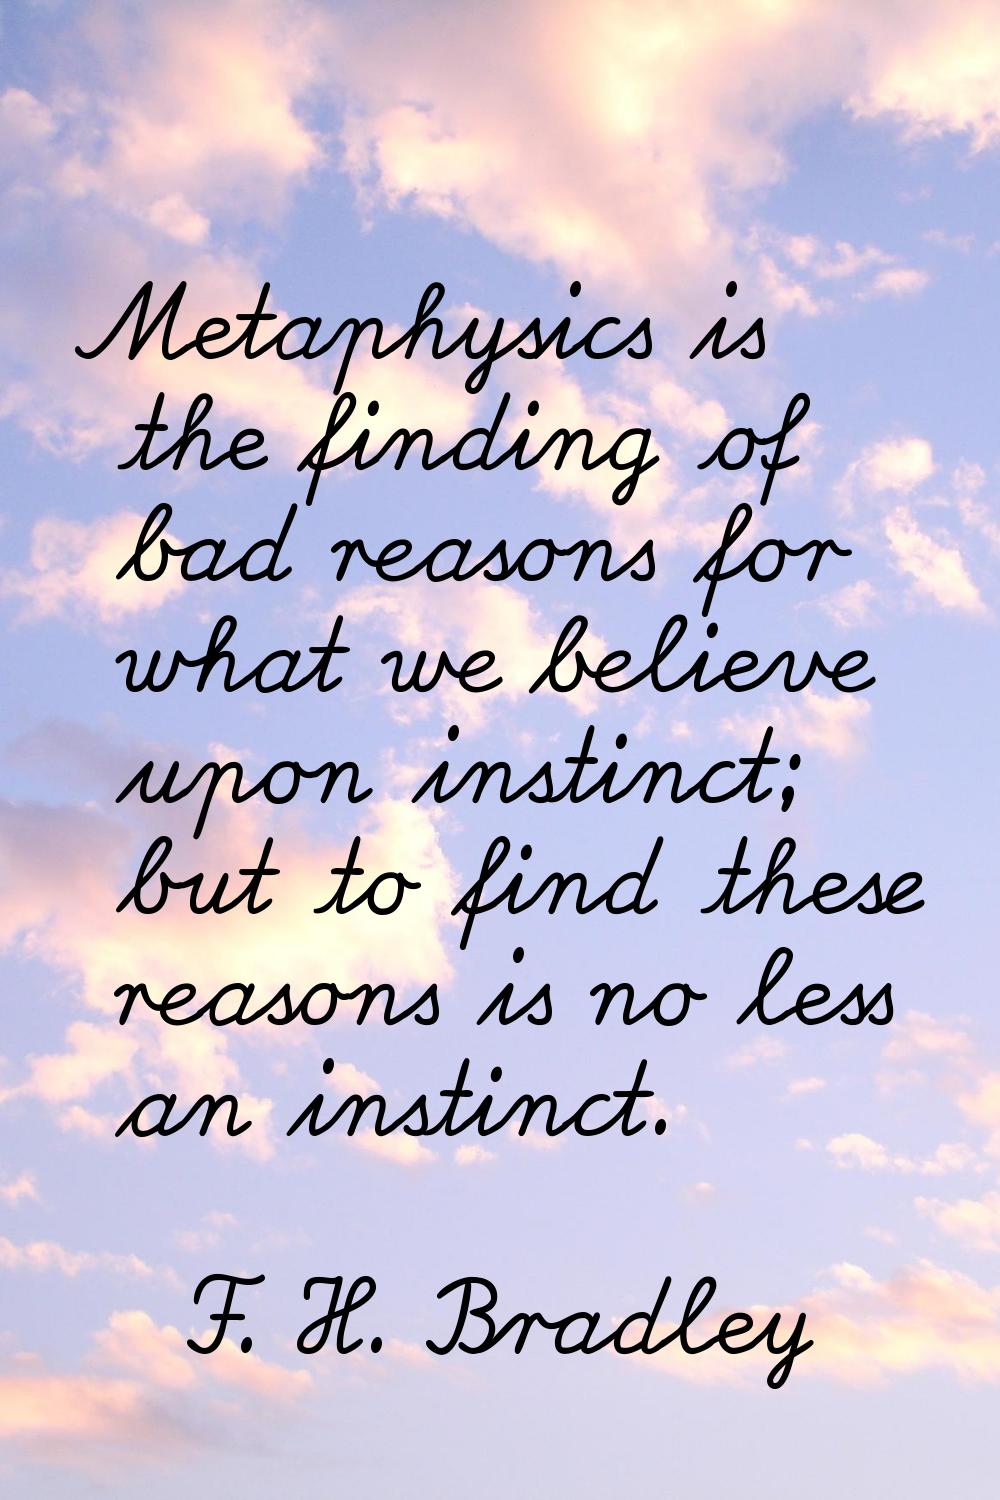 Metaphysics is the finding of bad reasons for what we believe upon instinct; but to find these reas